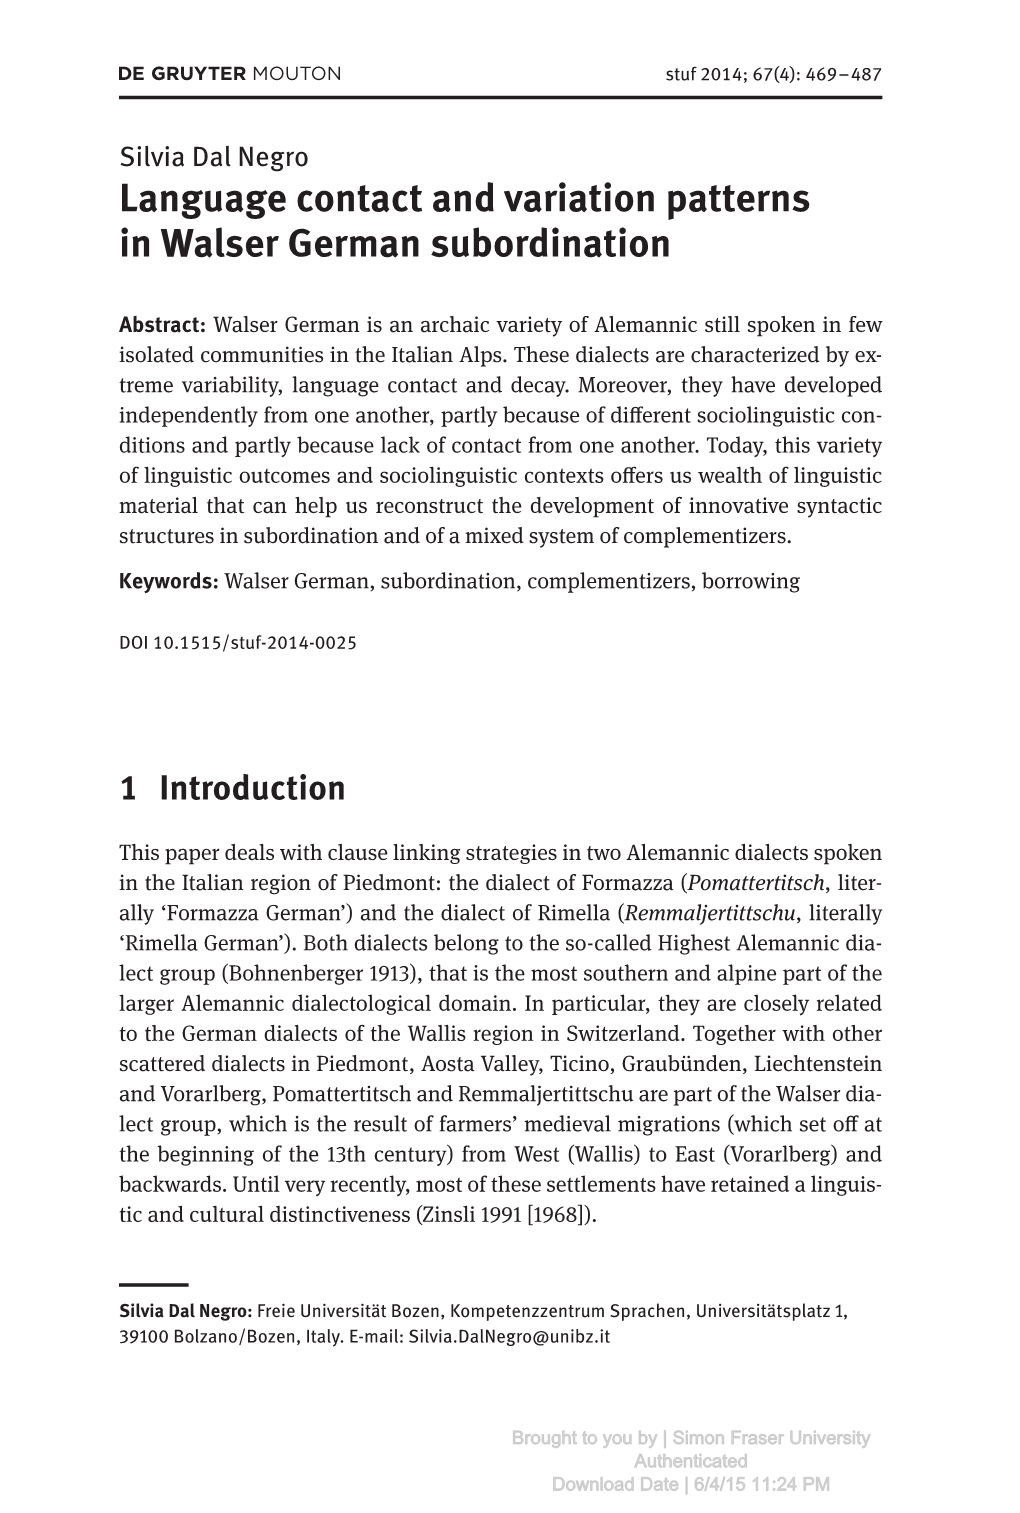 Language Contact and Variation Patterns in Walser German Subordination